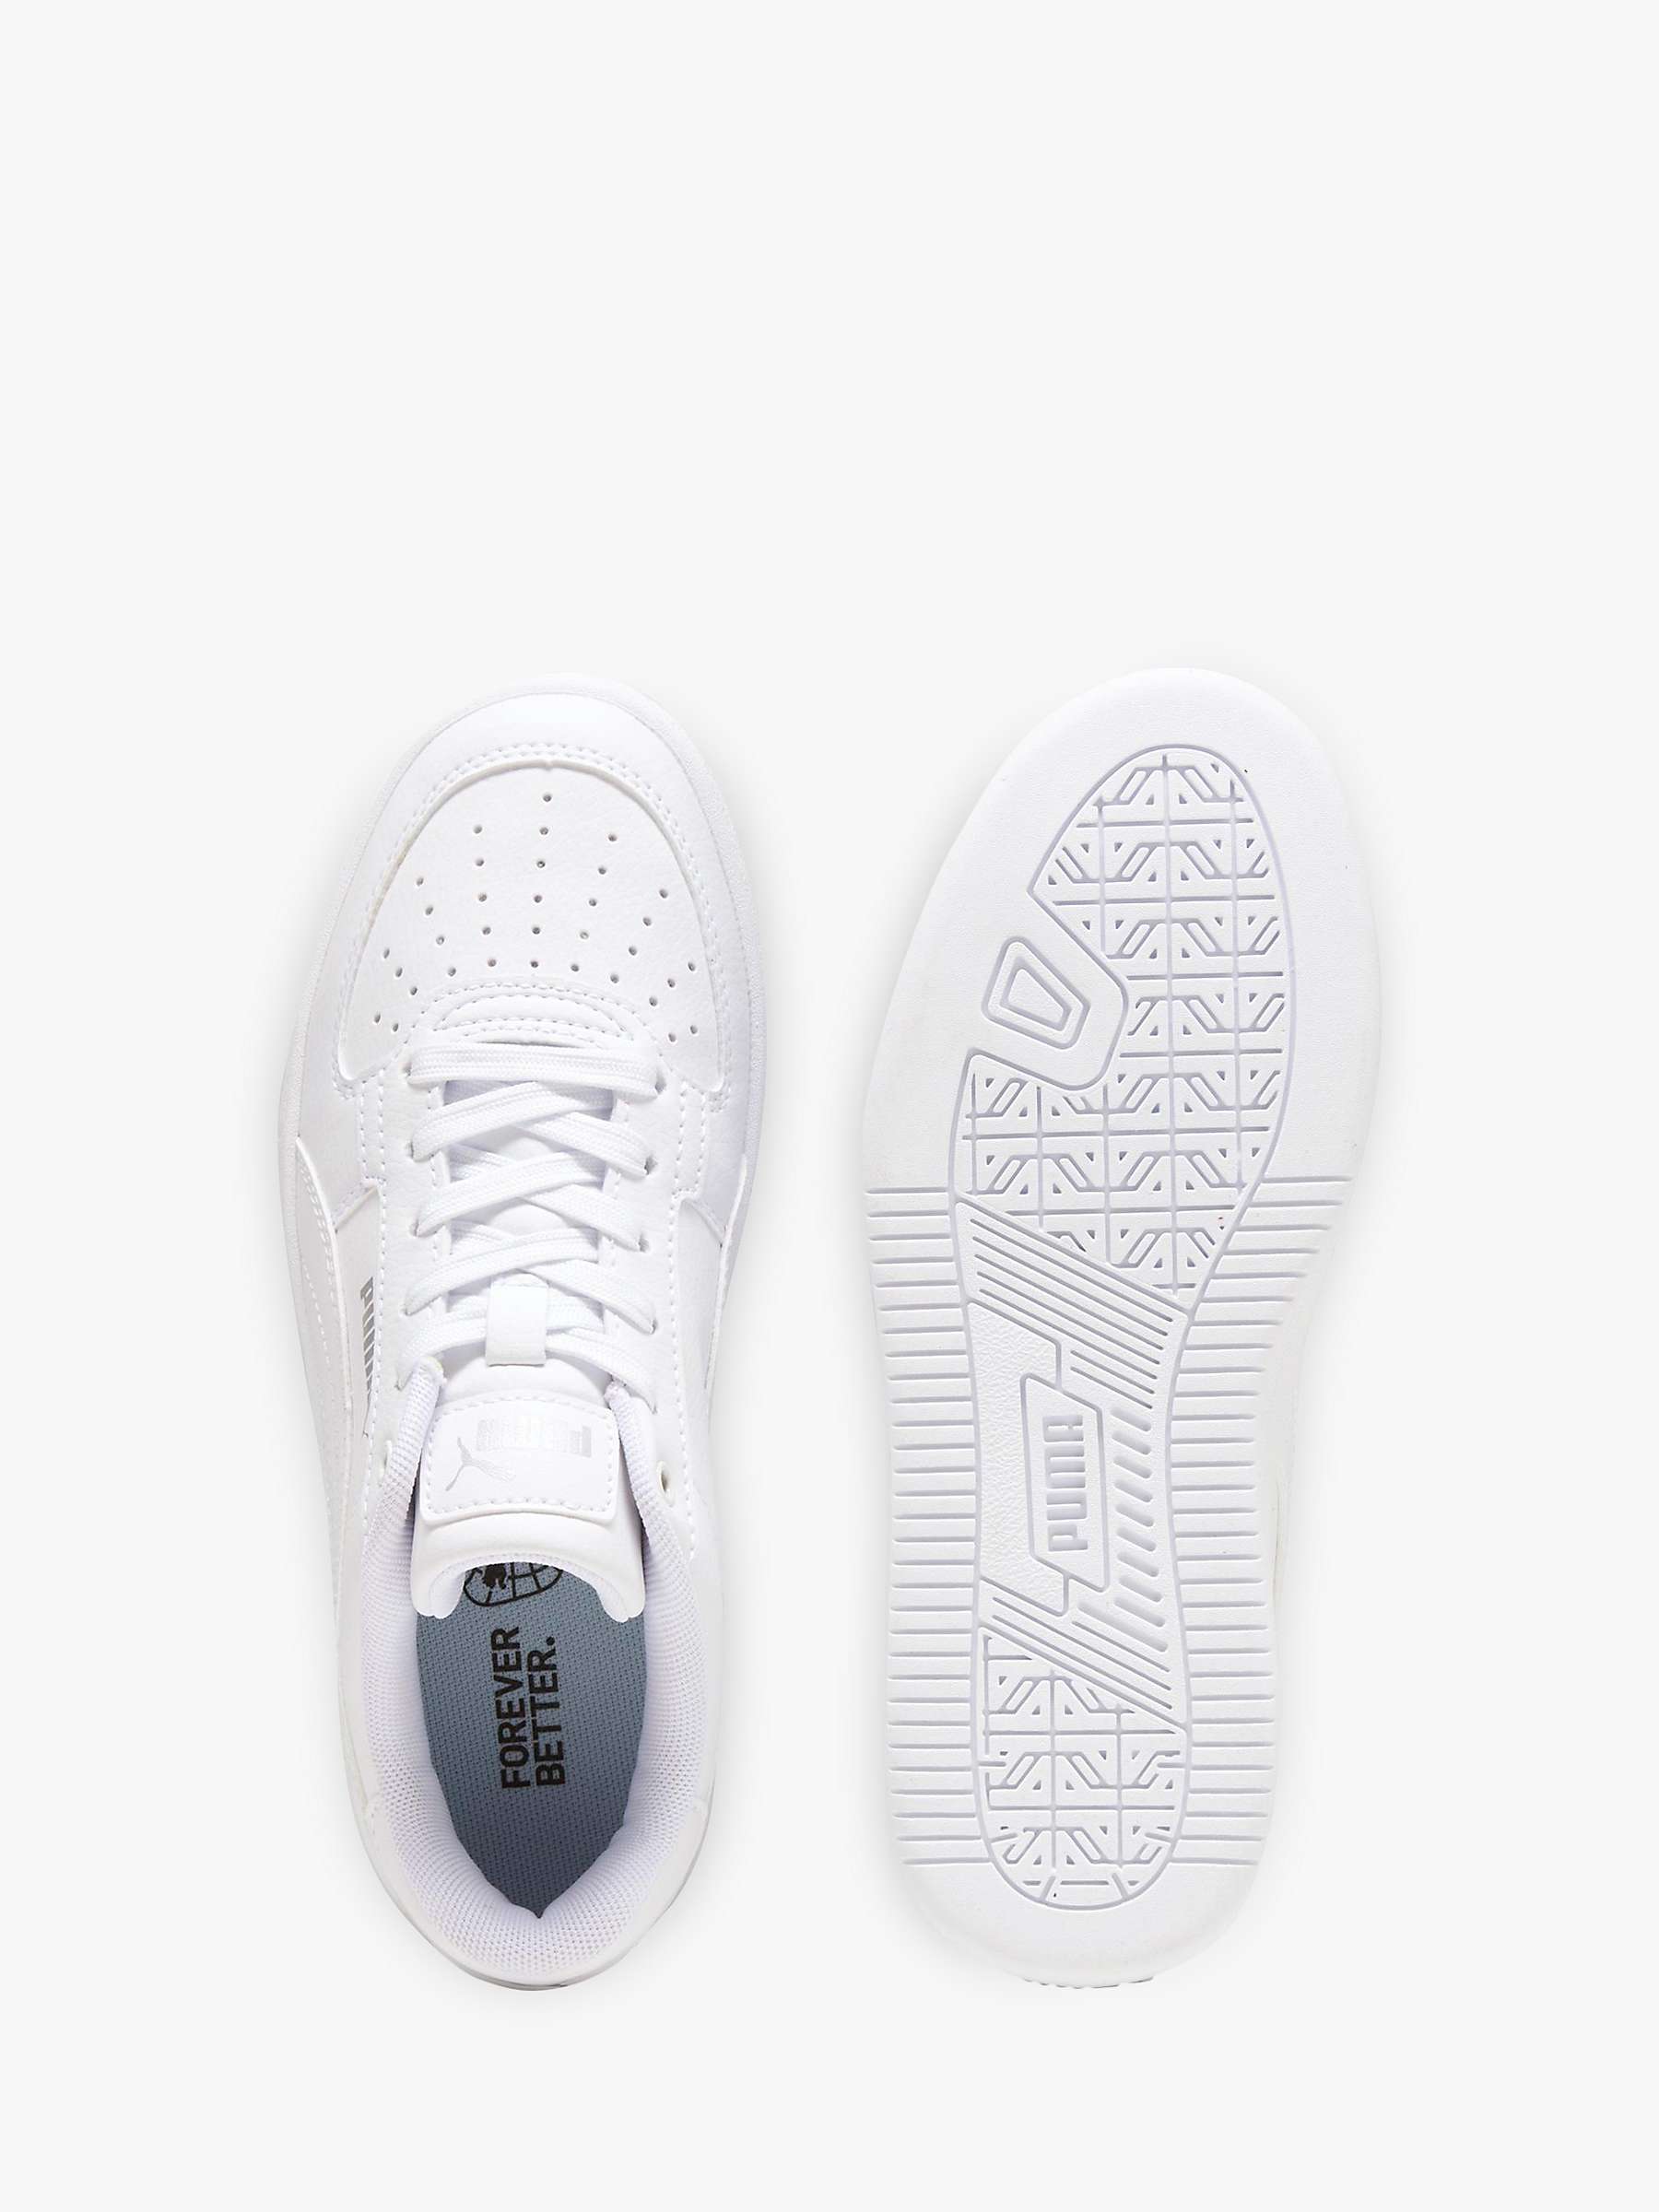 PUMA Kids' Caven 2.0 Lace Up Trainers, White at John Lewis & Partners